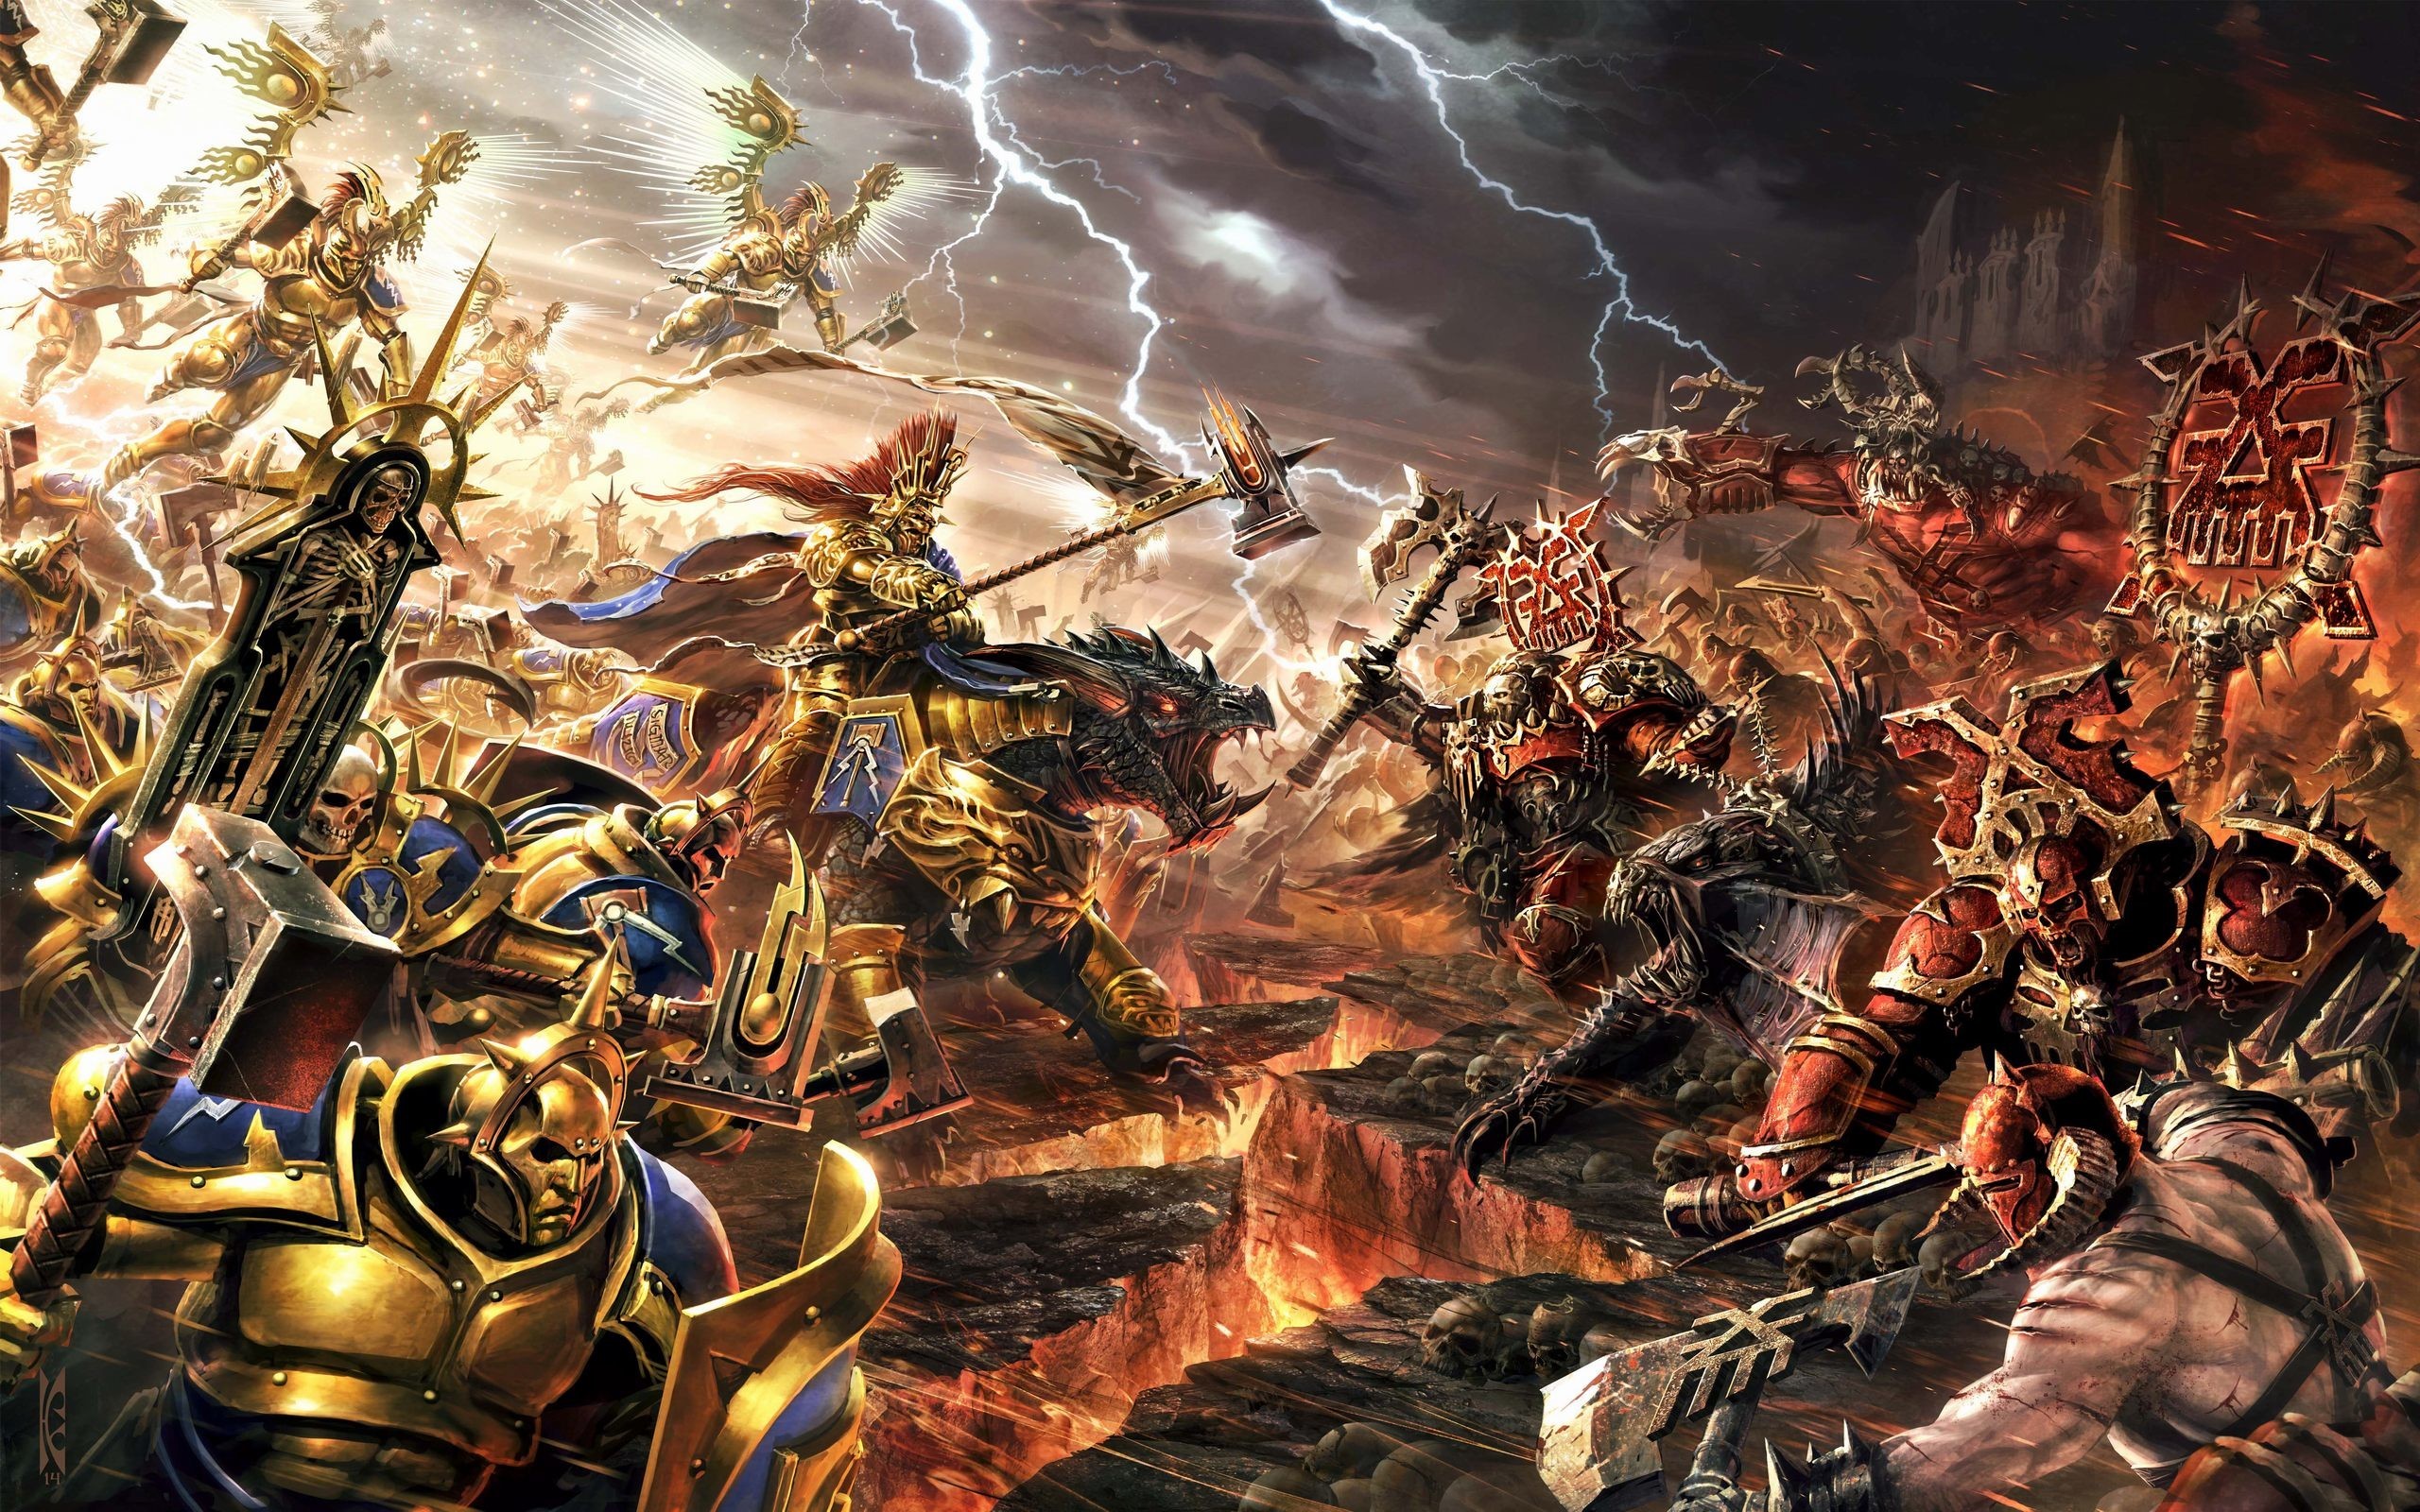 Warhammer Age of Sigmar RTS game delayed further into 2023